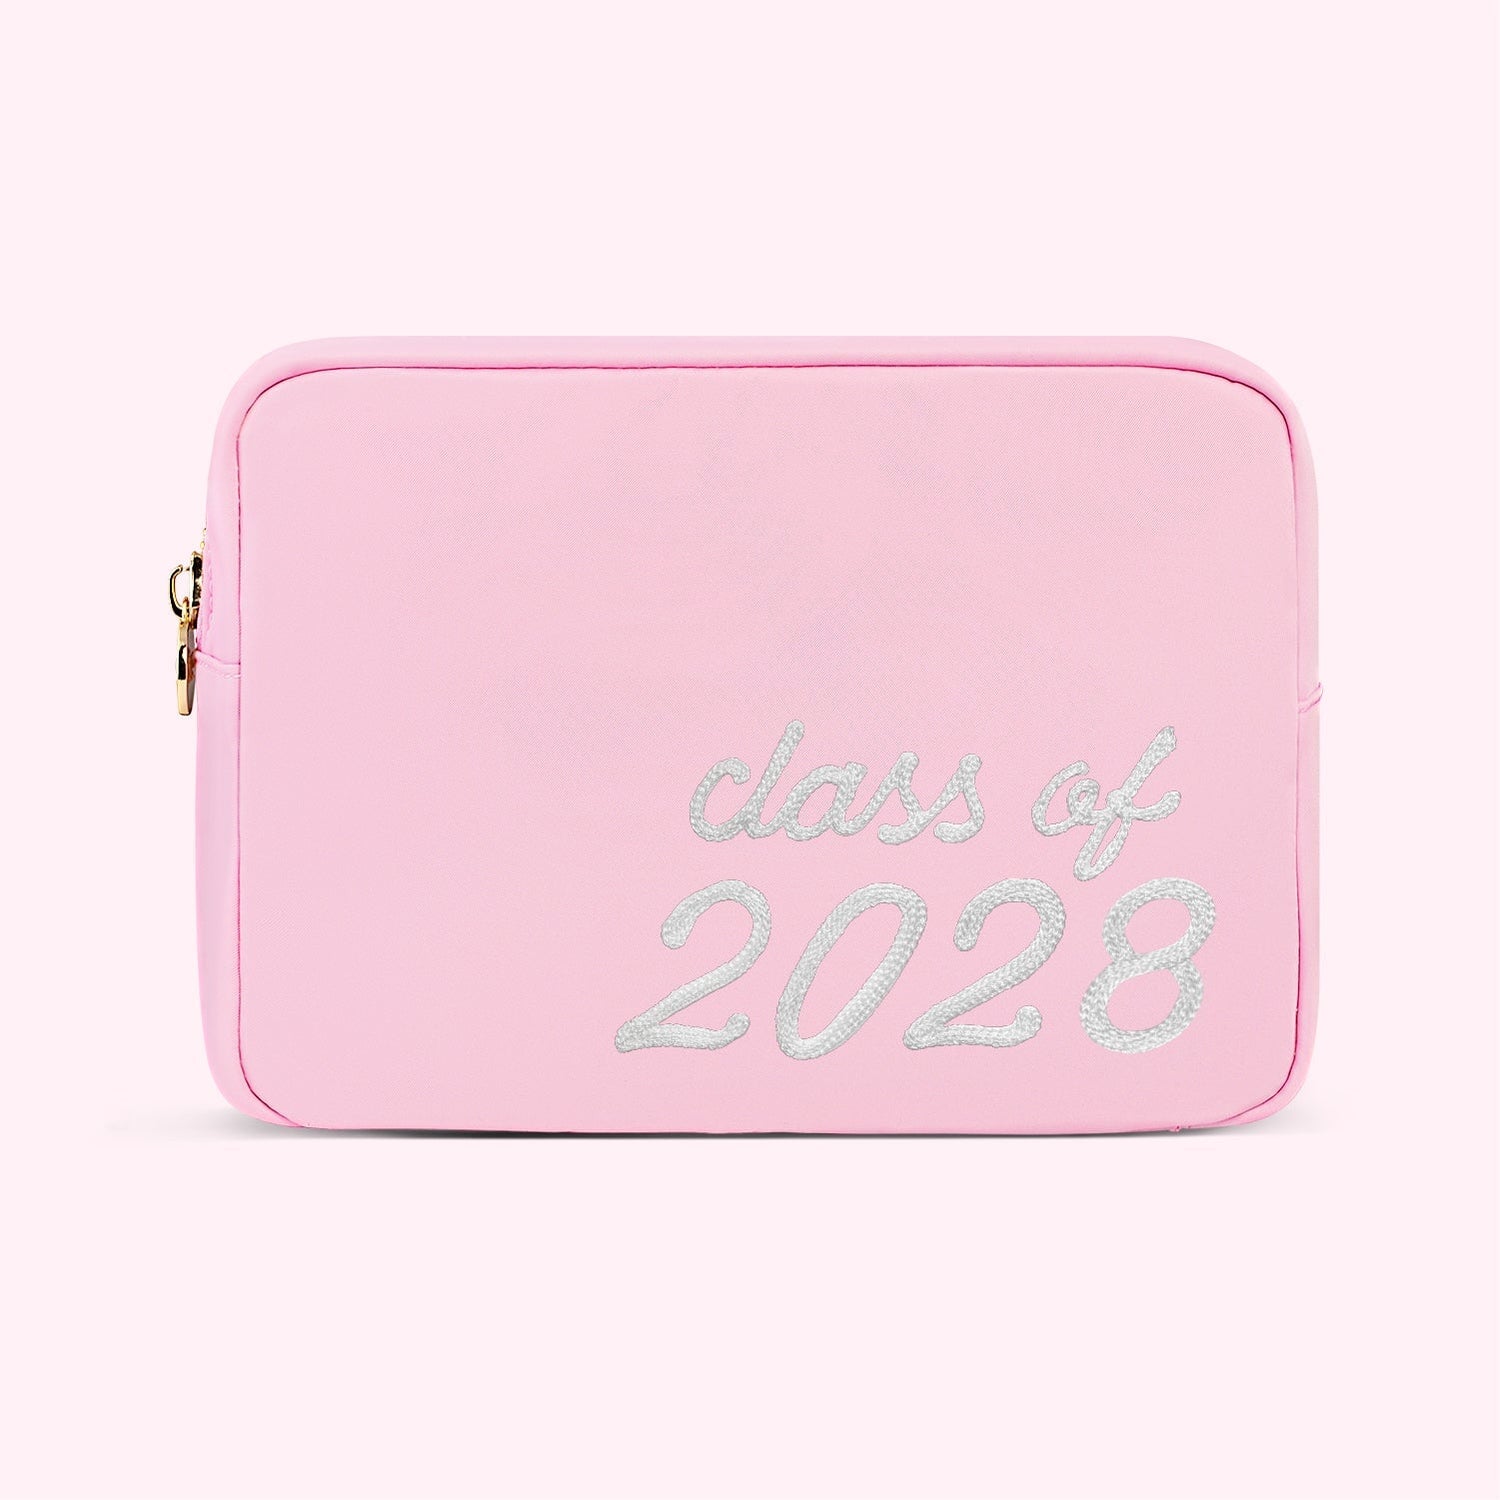 Customizer Class of 2028 Large Pouch